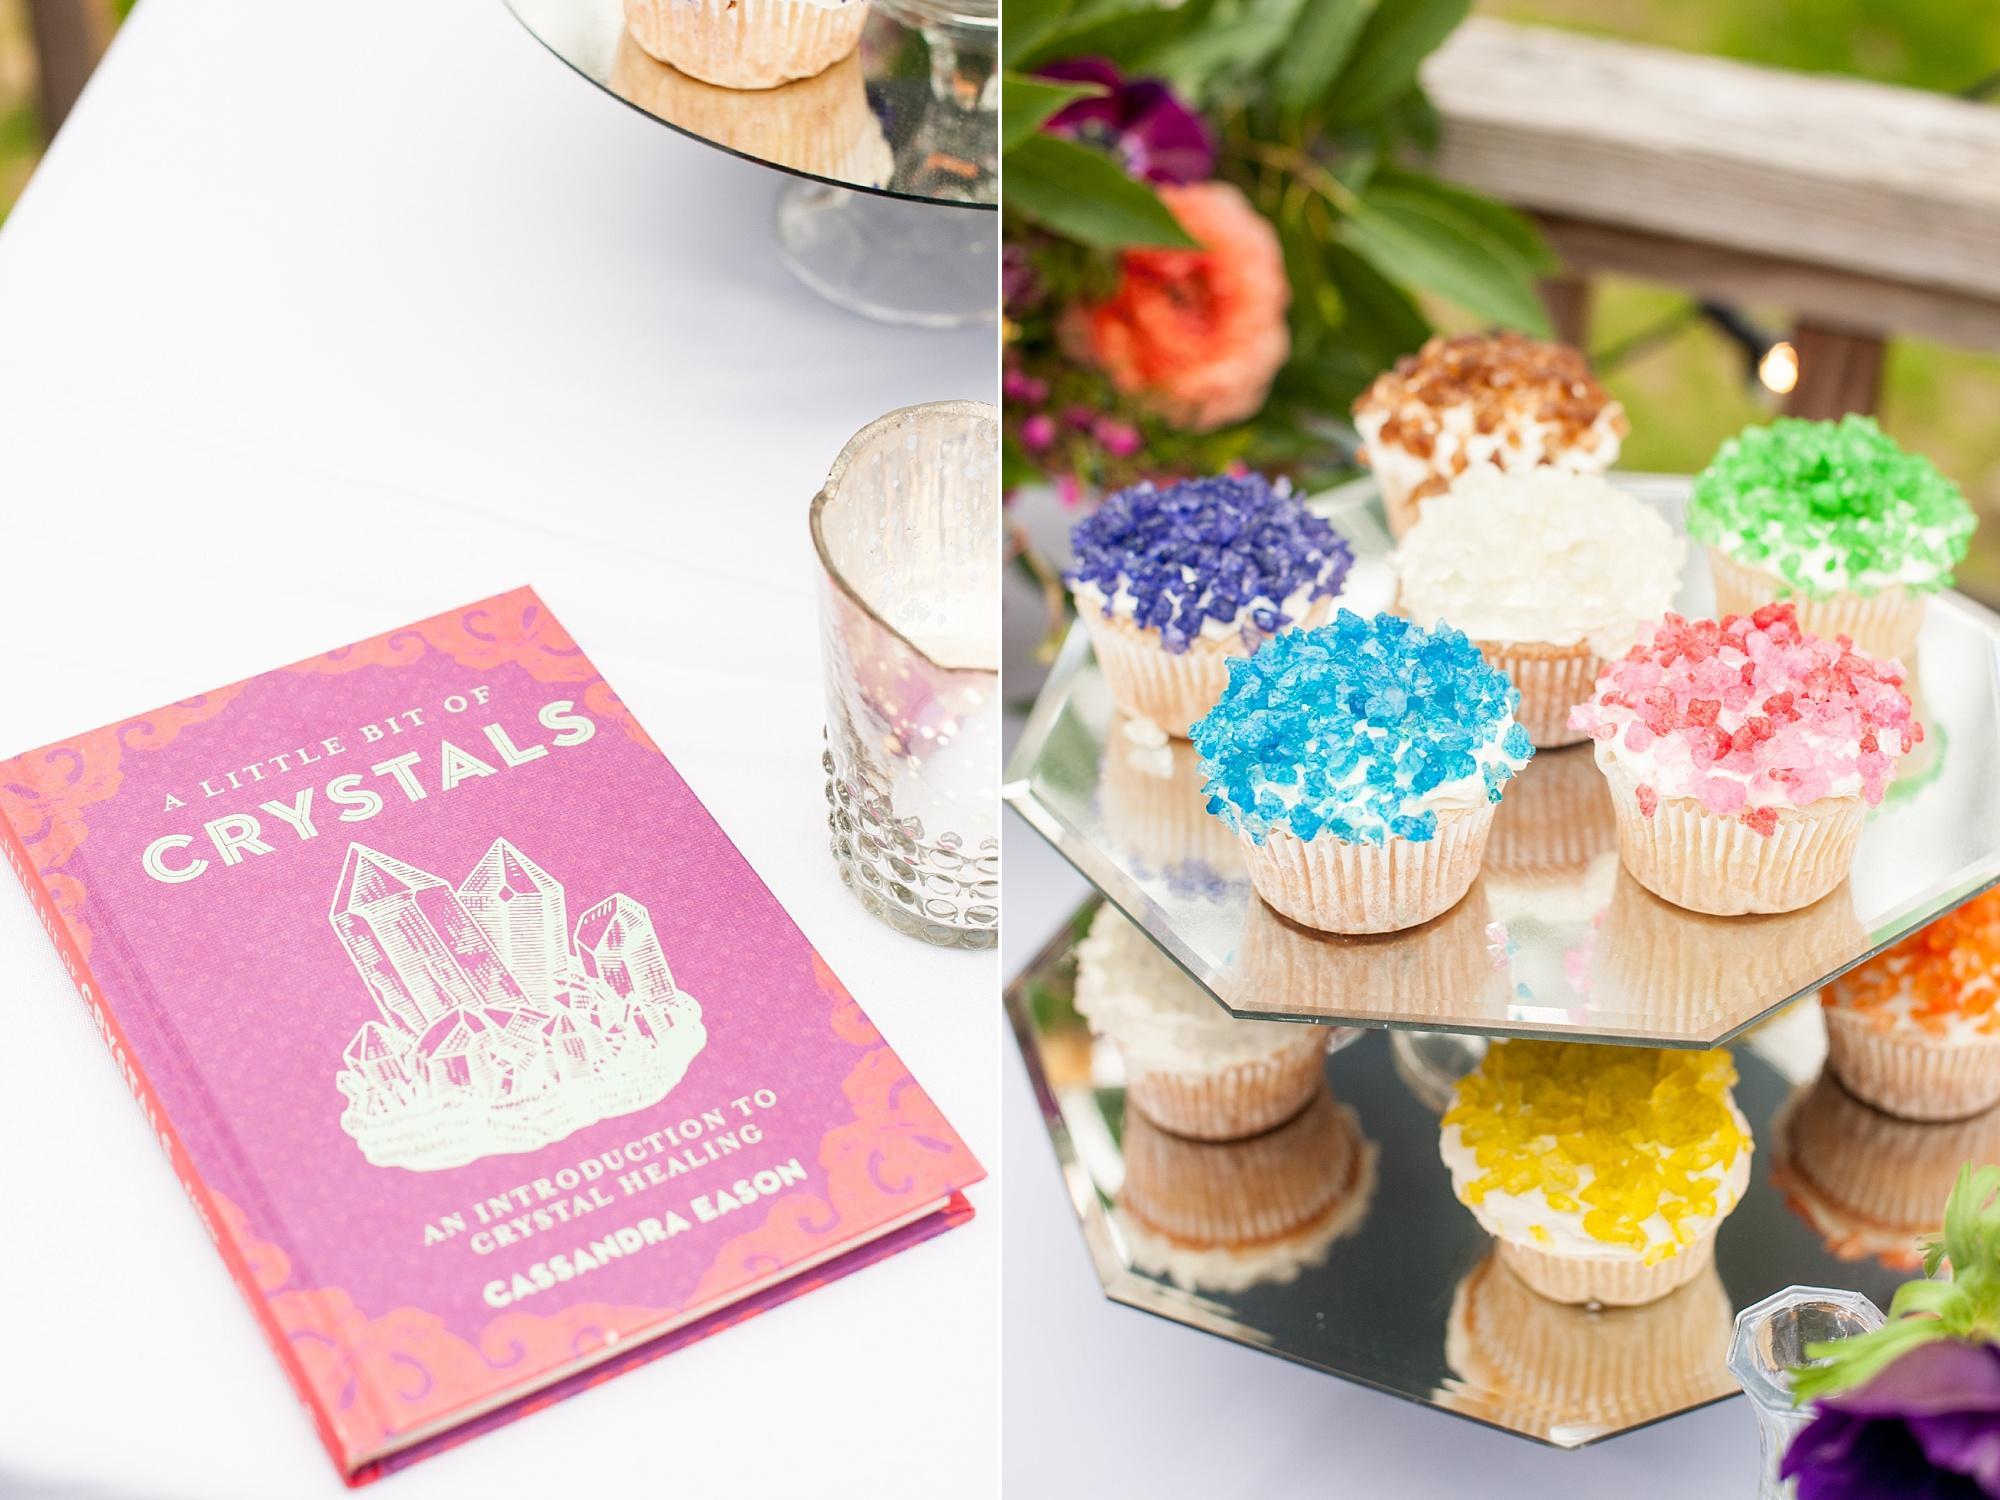 Enchanted garden birthday photos with geode crystal rock candy cupcakes. Images by Mikkel Paige Photography, Raleigh wedding photographer.